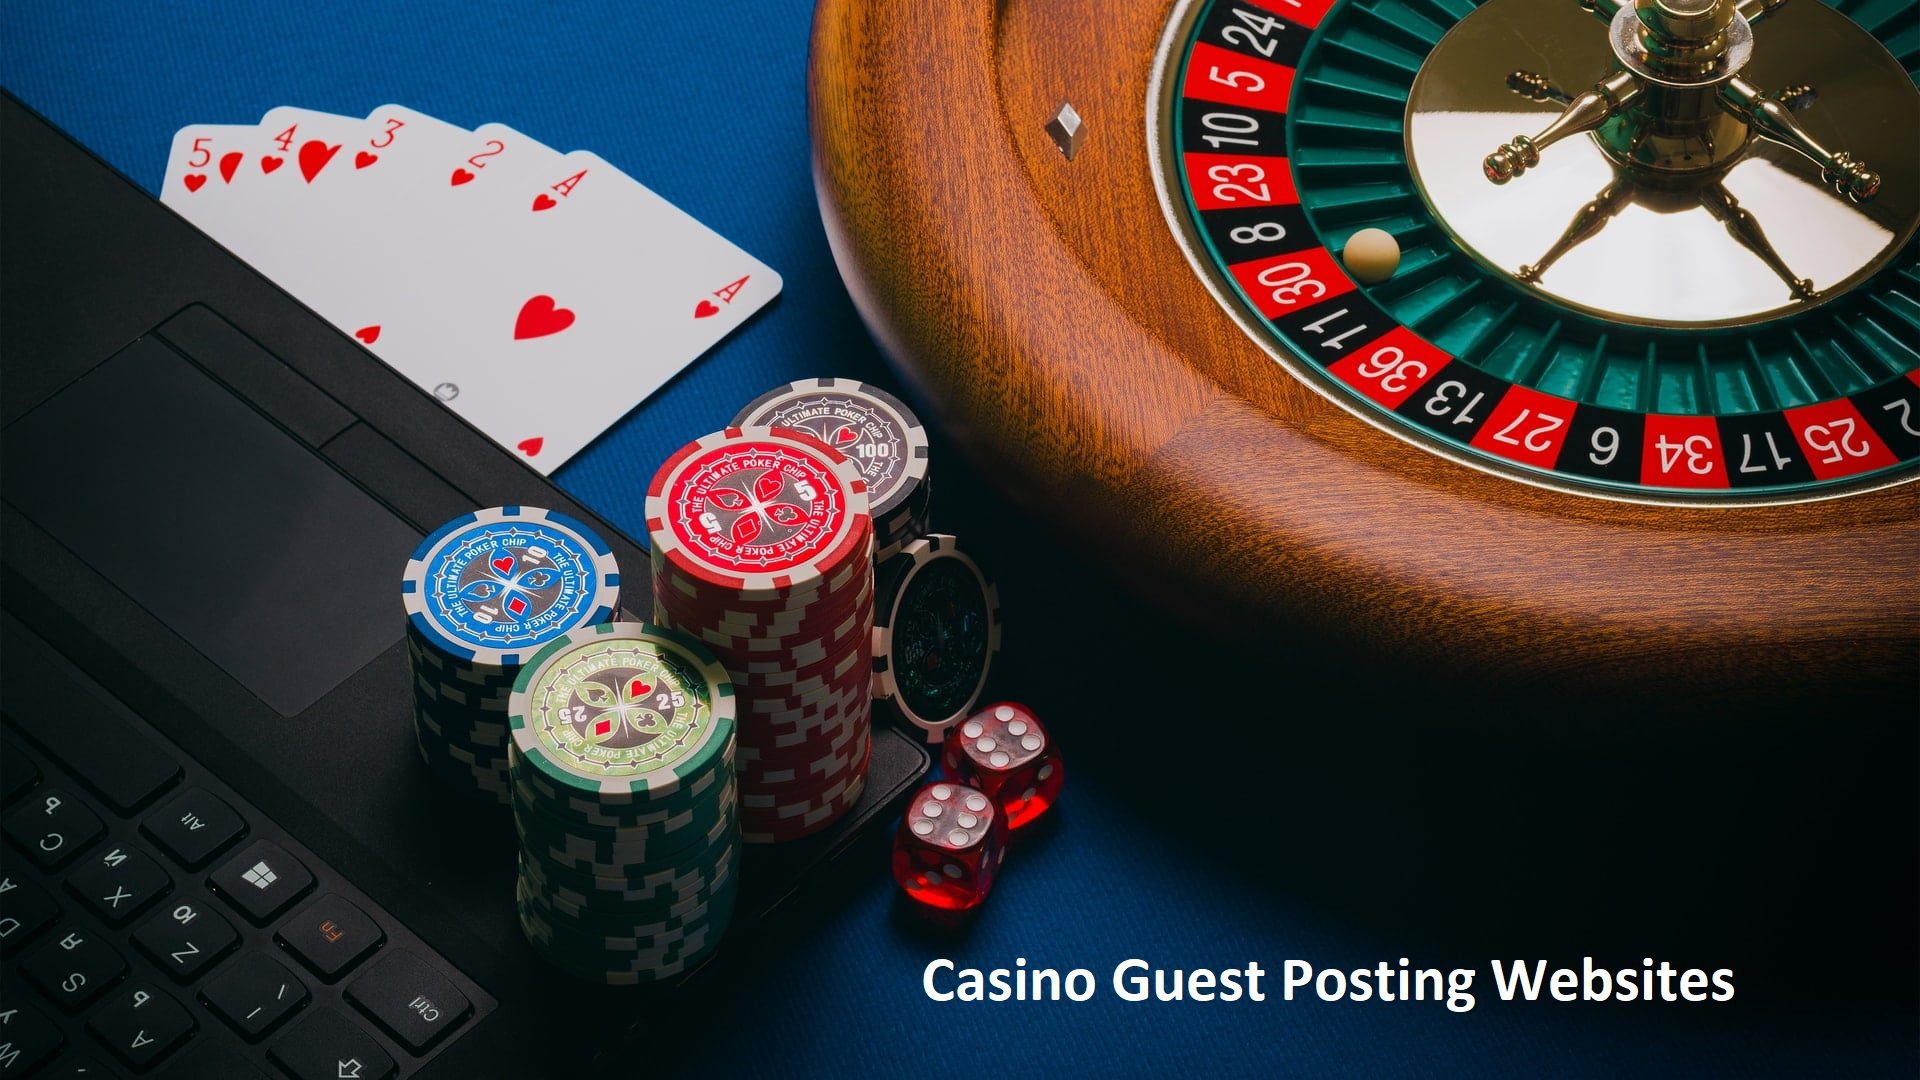 Top 50+ Casino Guest Posting websites: List for Gamblers and Writers